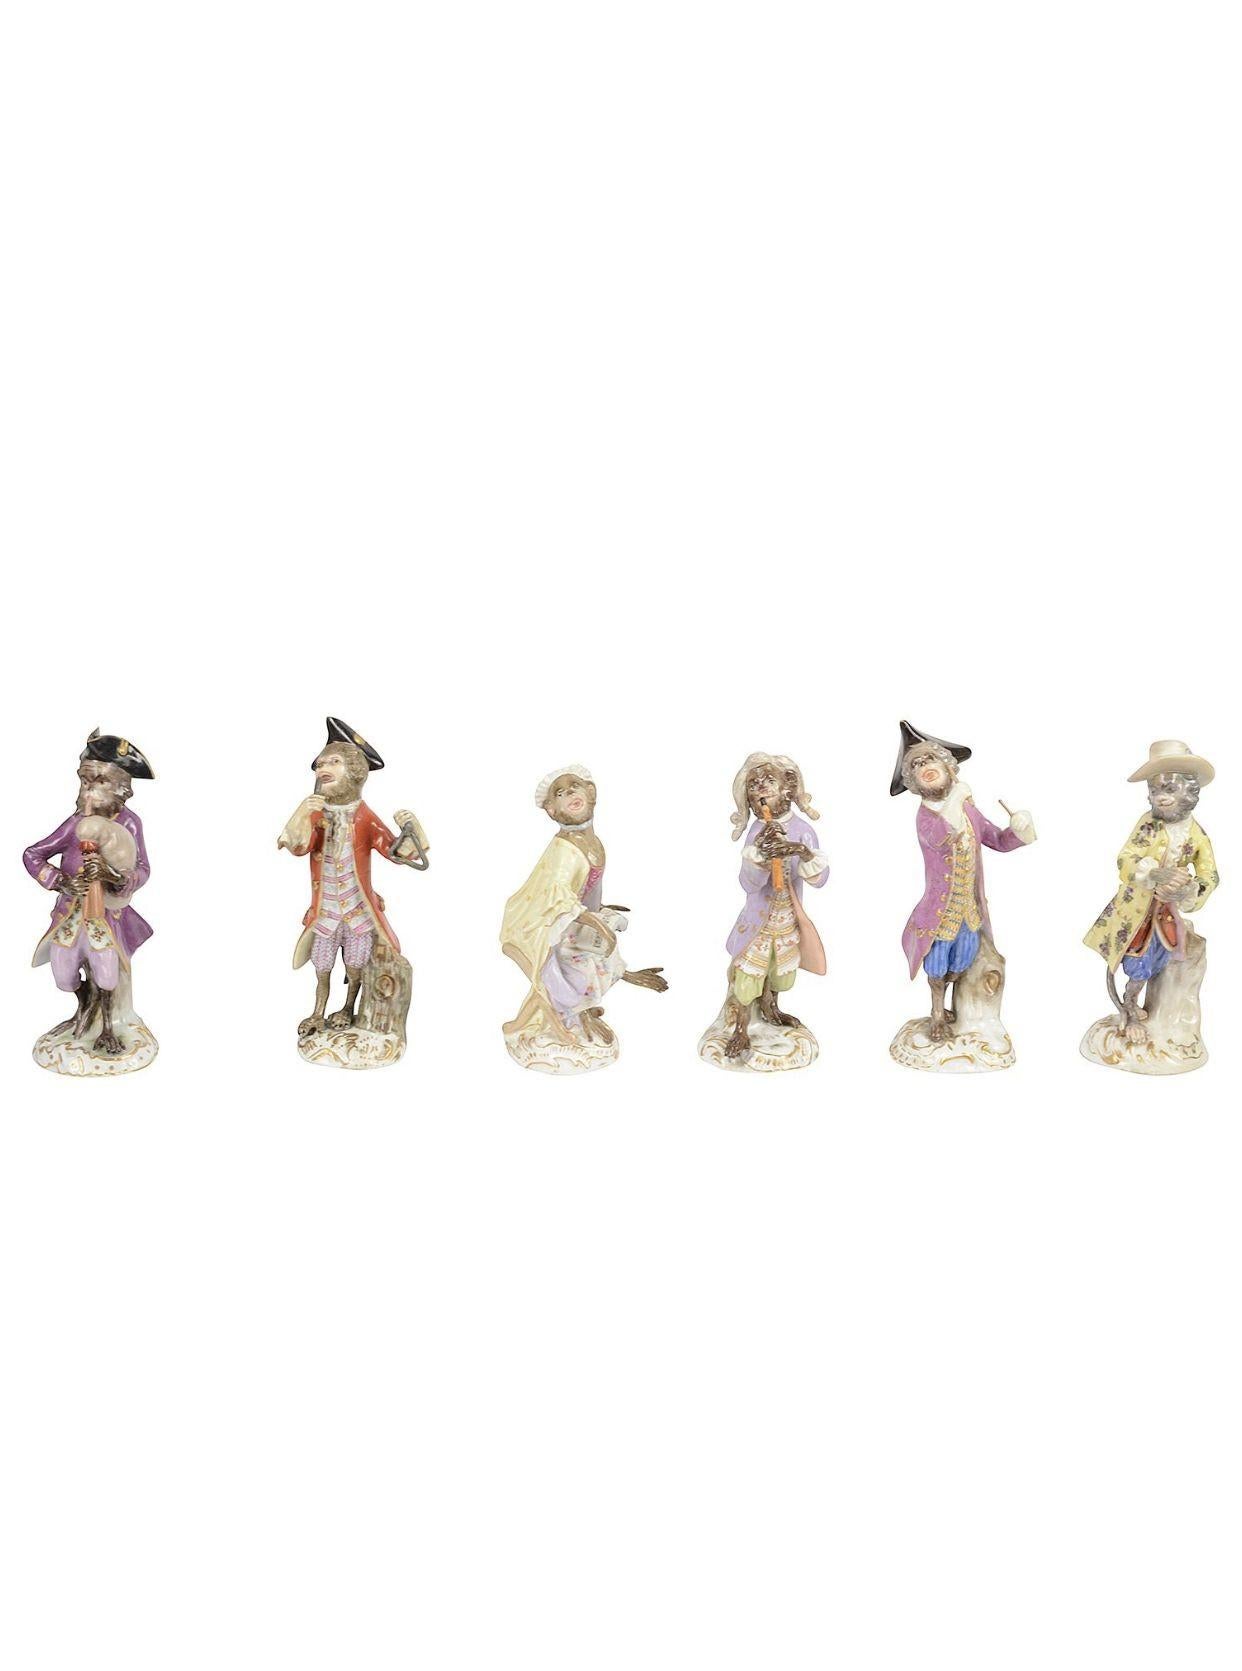 A rare set of 16 late 19th Century Meissen porcelain Monkey band, with the conductor on a pedestal and various band players. 
Circa 1890.
 
Batch 66 VT YEKZZ.